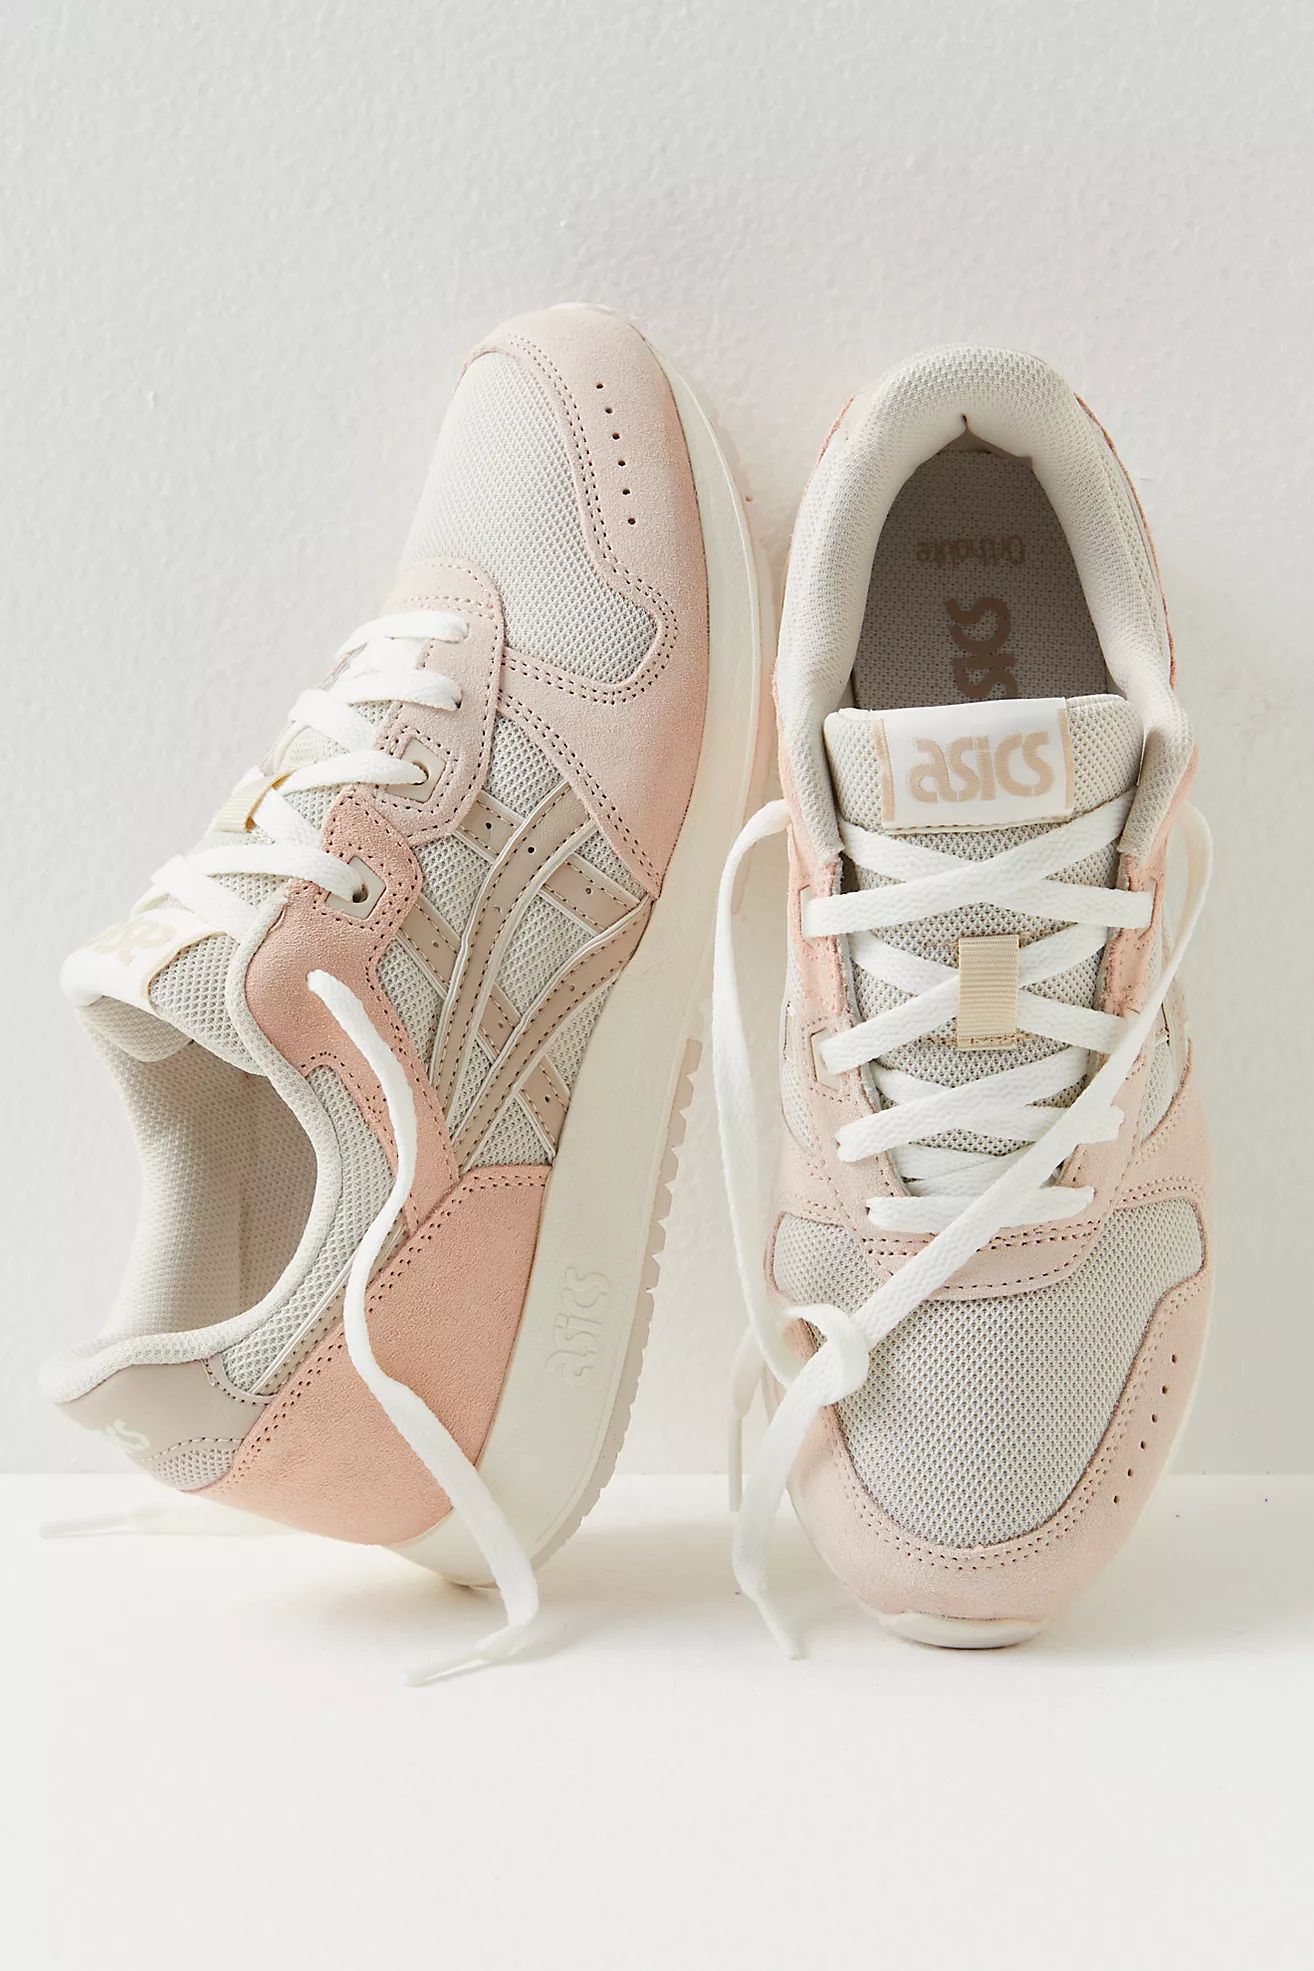 Asics Lyte Classic Sneakers | Free People (Global - UK&FR Excluded)